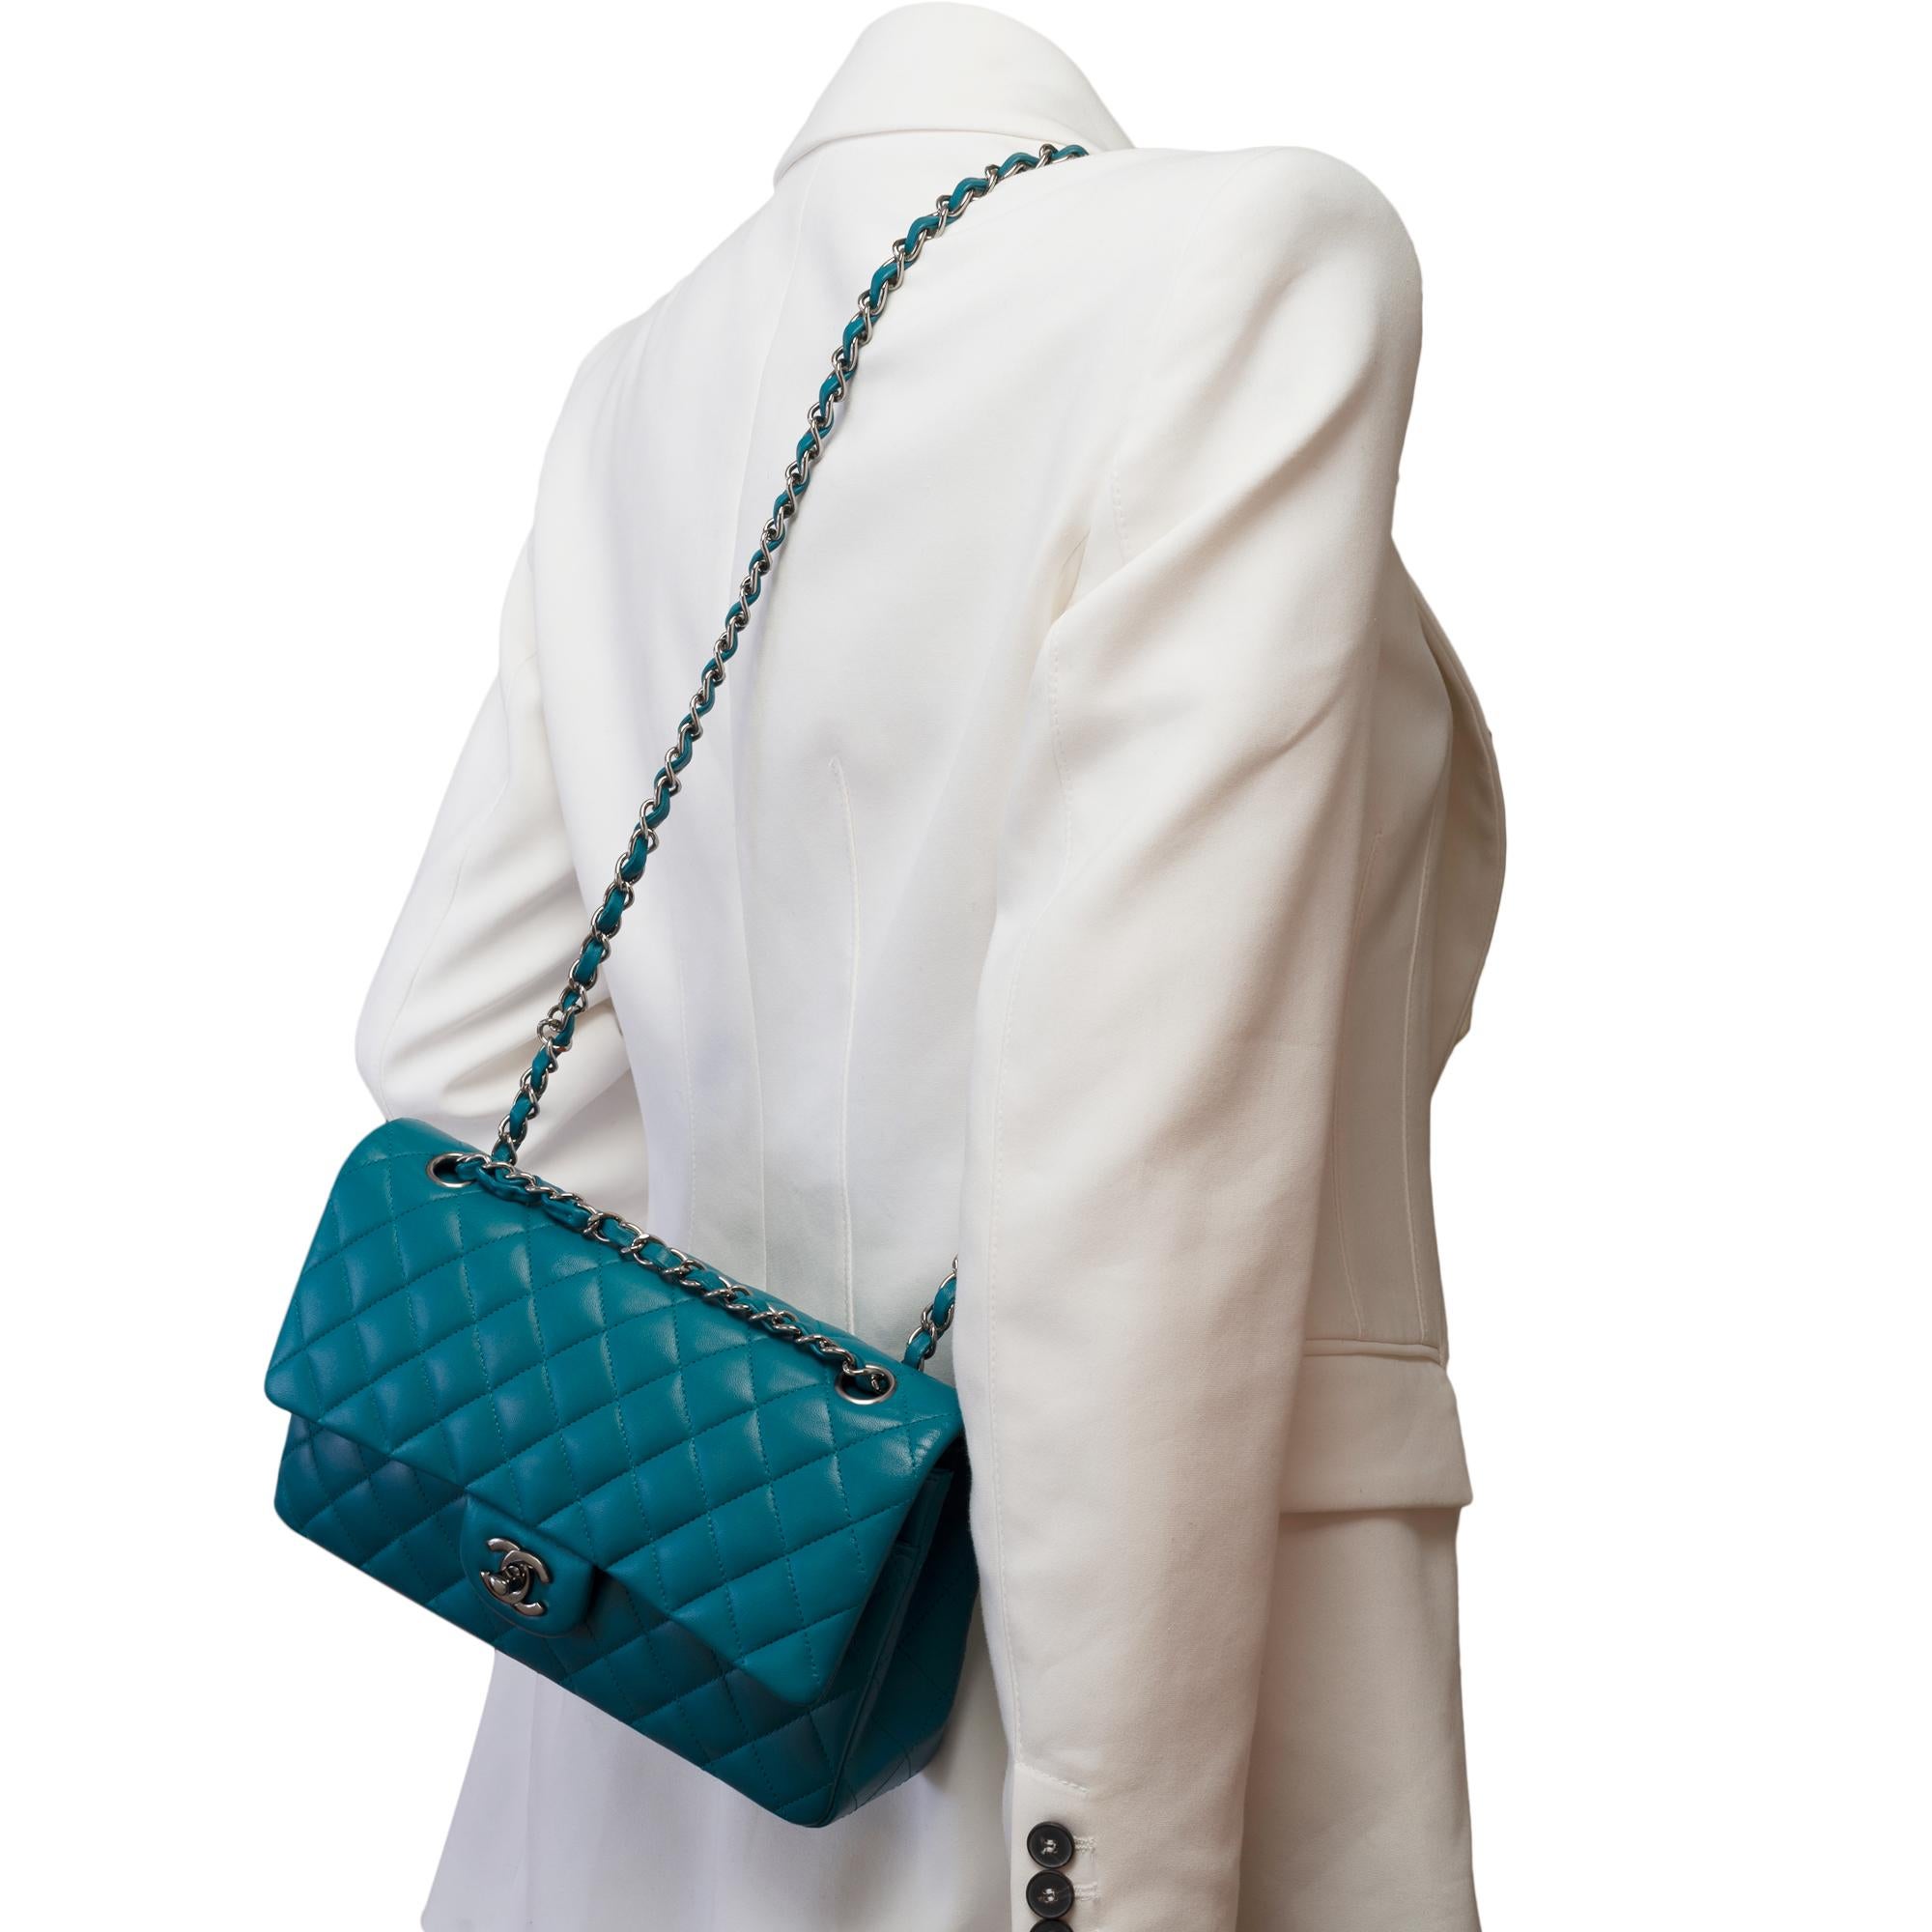 Chanel Timeless double flap shoulder bag in Turquoise quilted lamb leather, BSHW For Sale 9